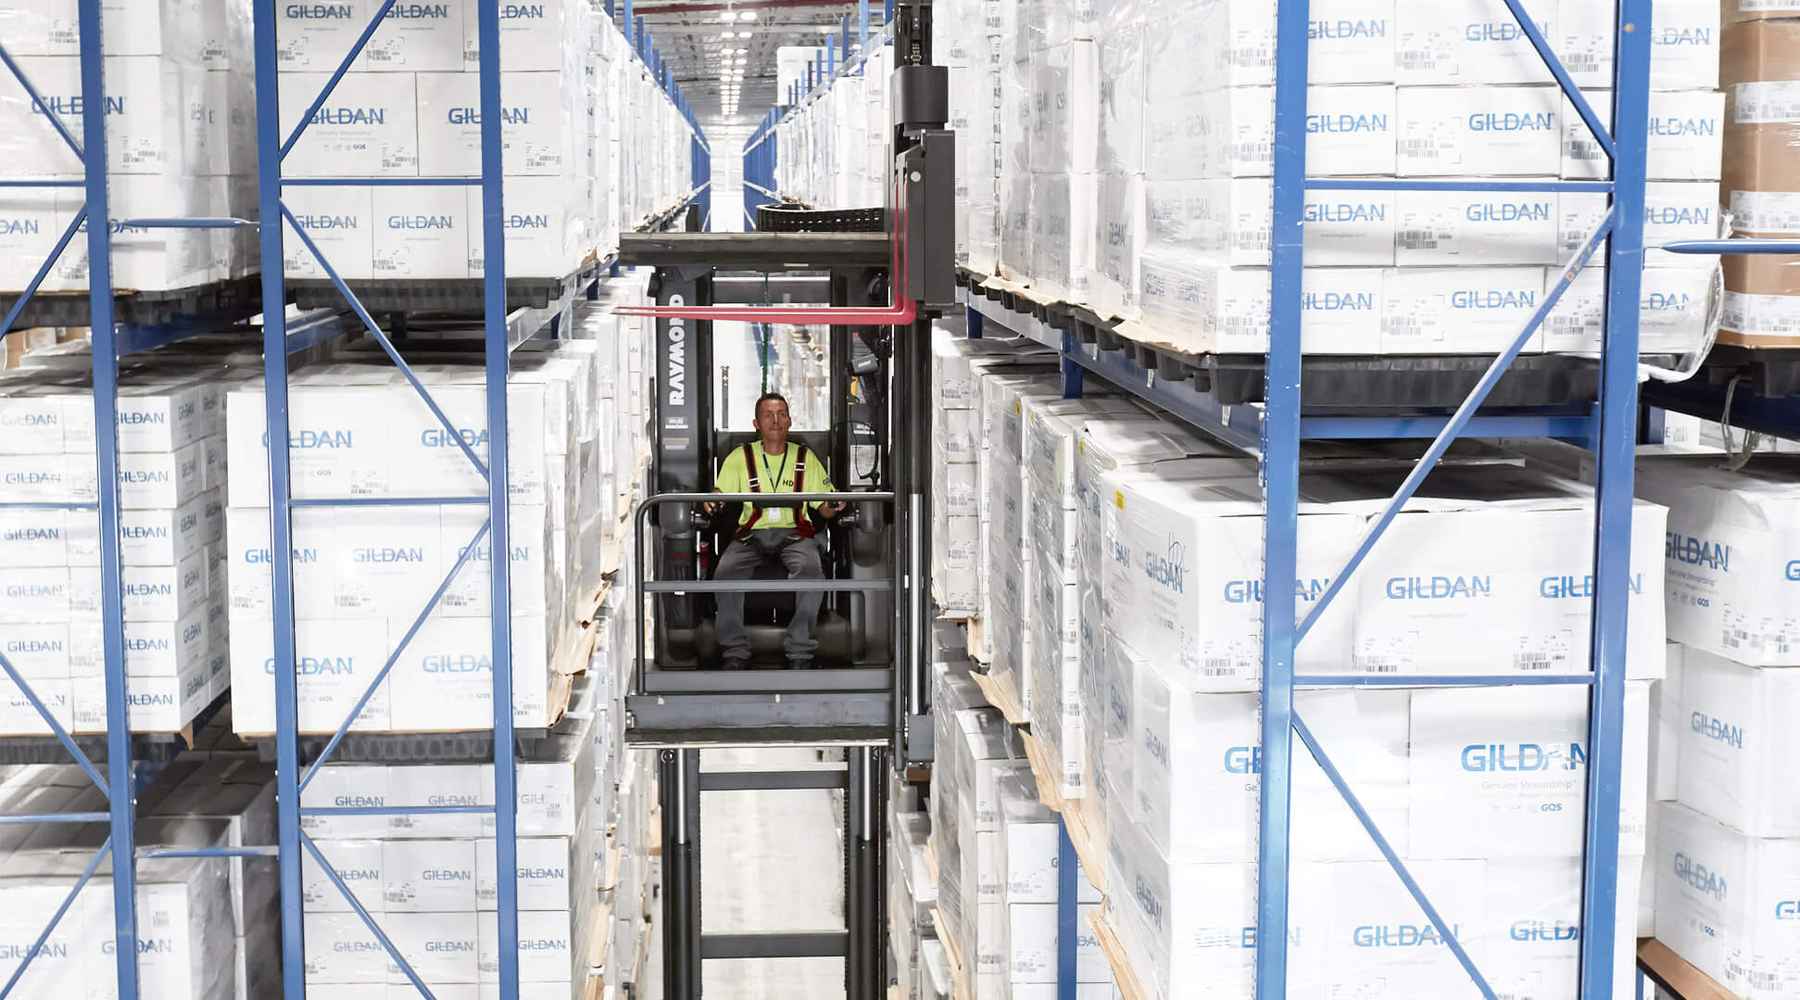 A Gildan employee at our distribution centre is operating a forklift between stacks of Gildan boxes.